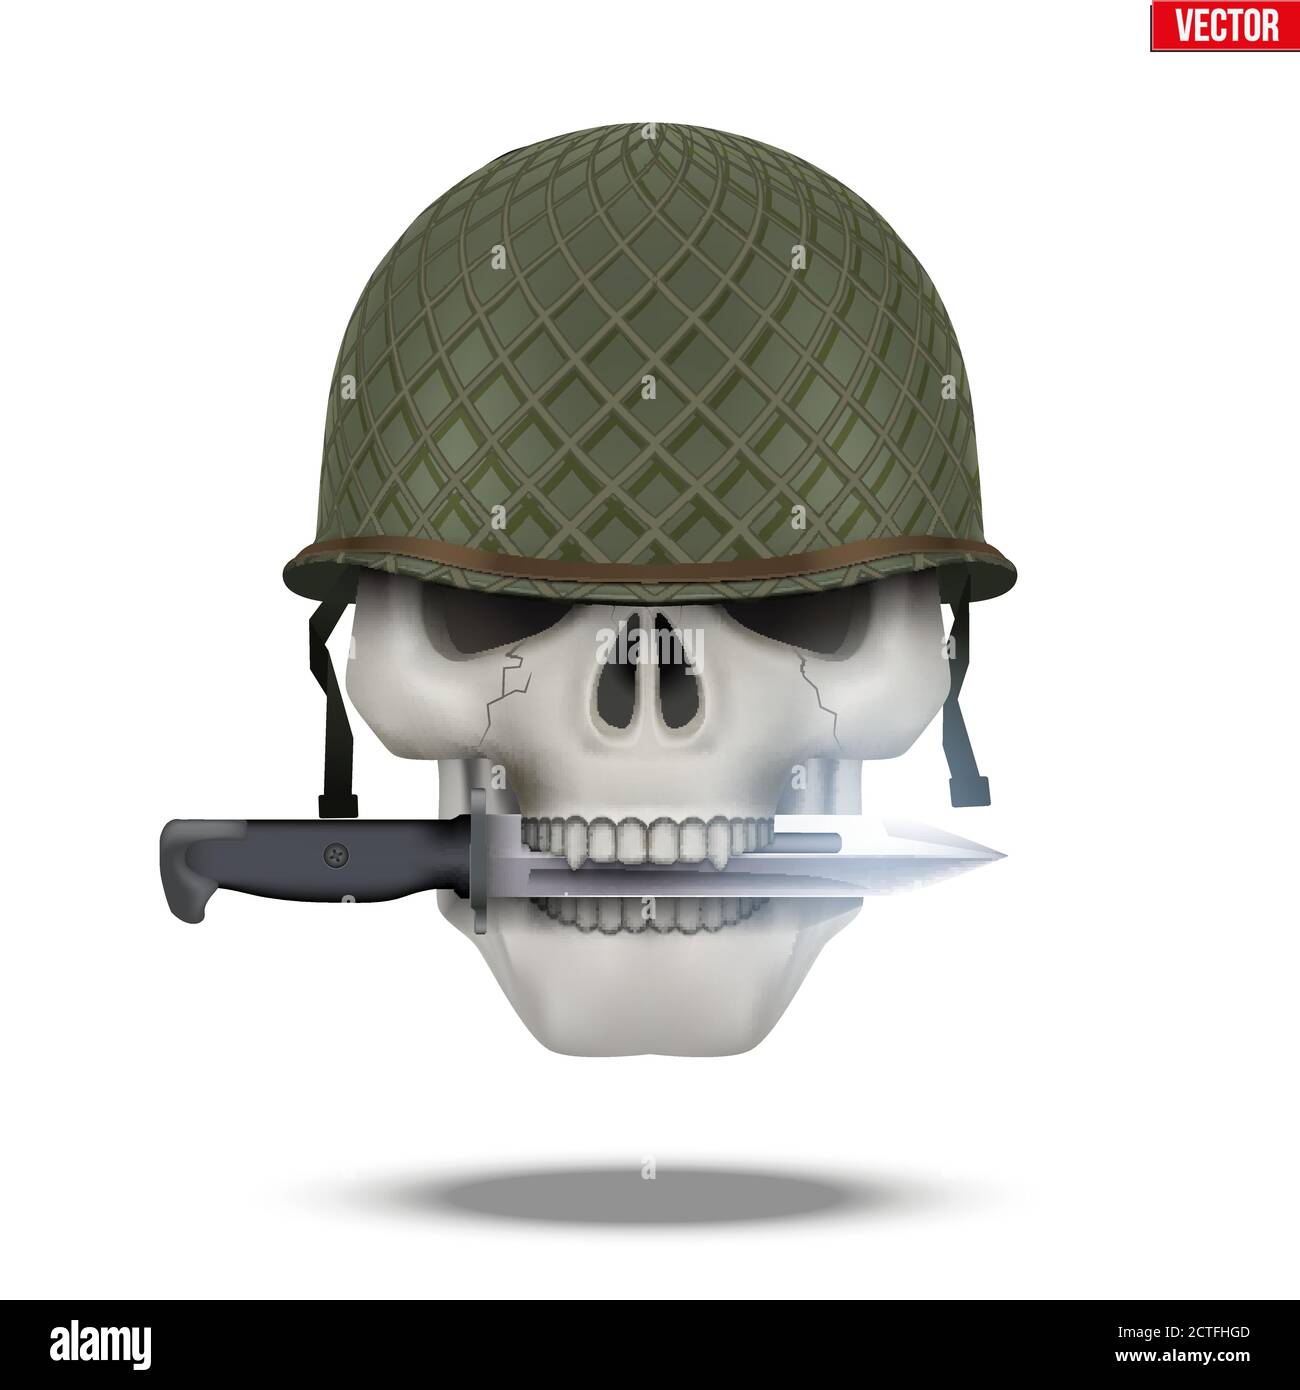 Skull with Military helmet and knife. Stock Vector